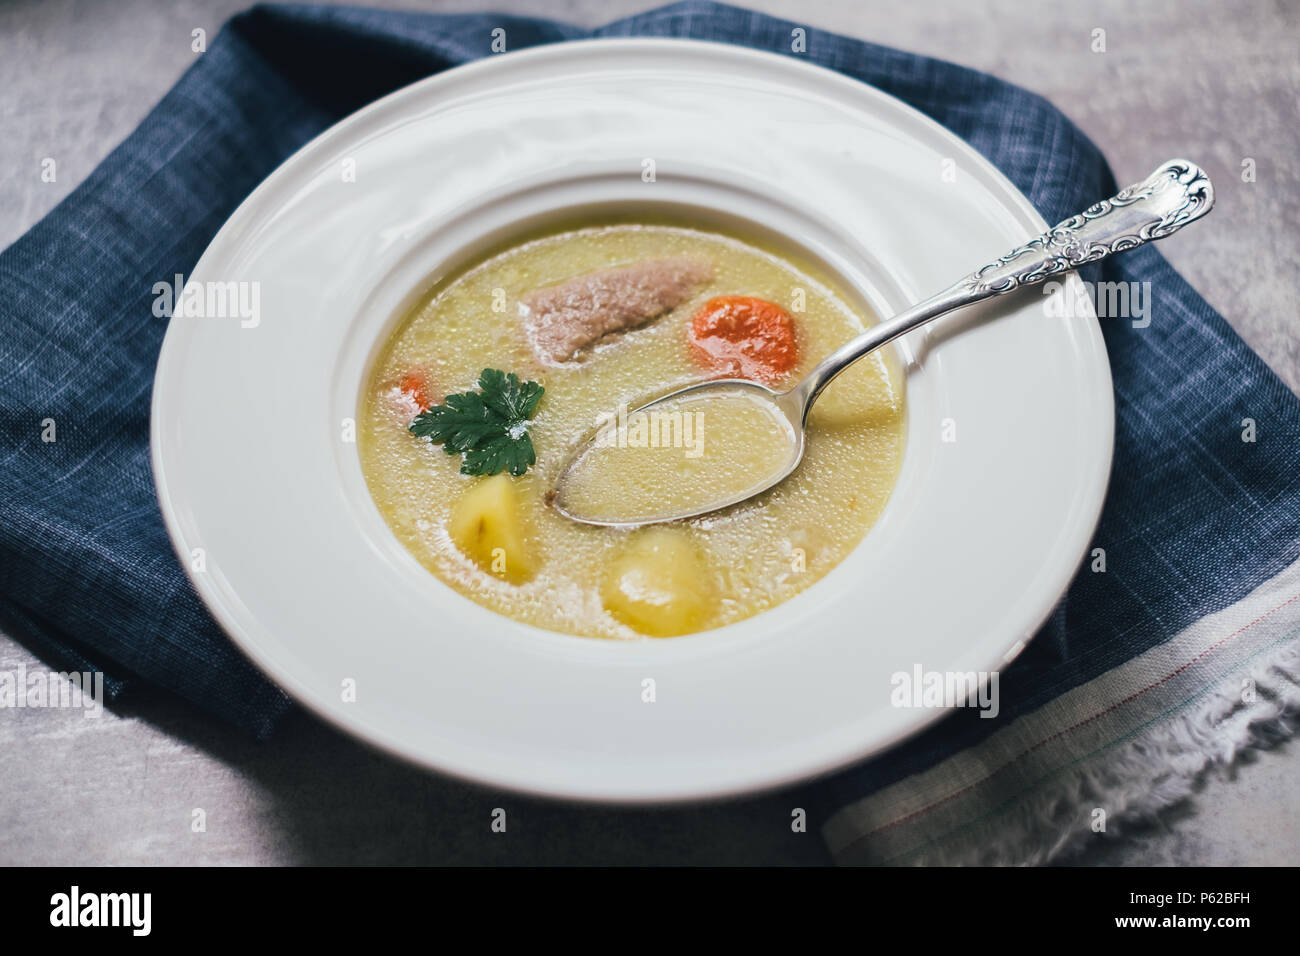 Soup with potato and pork meat Stock Photo